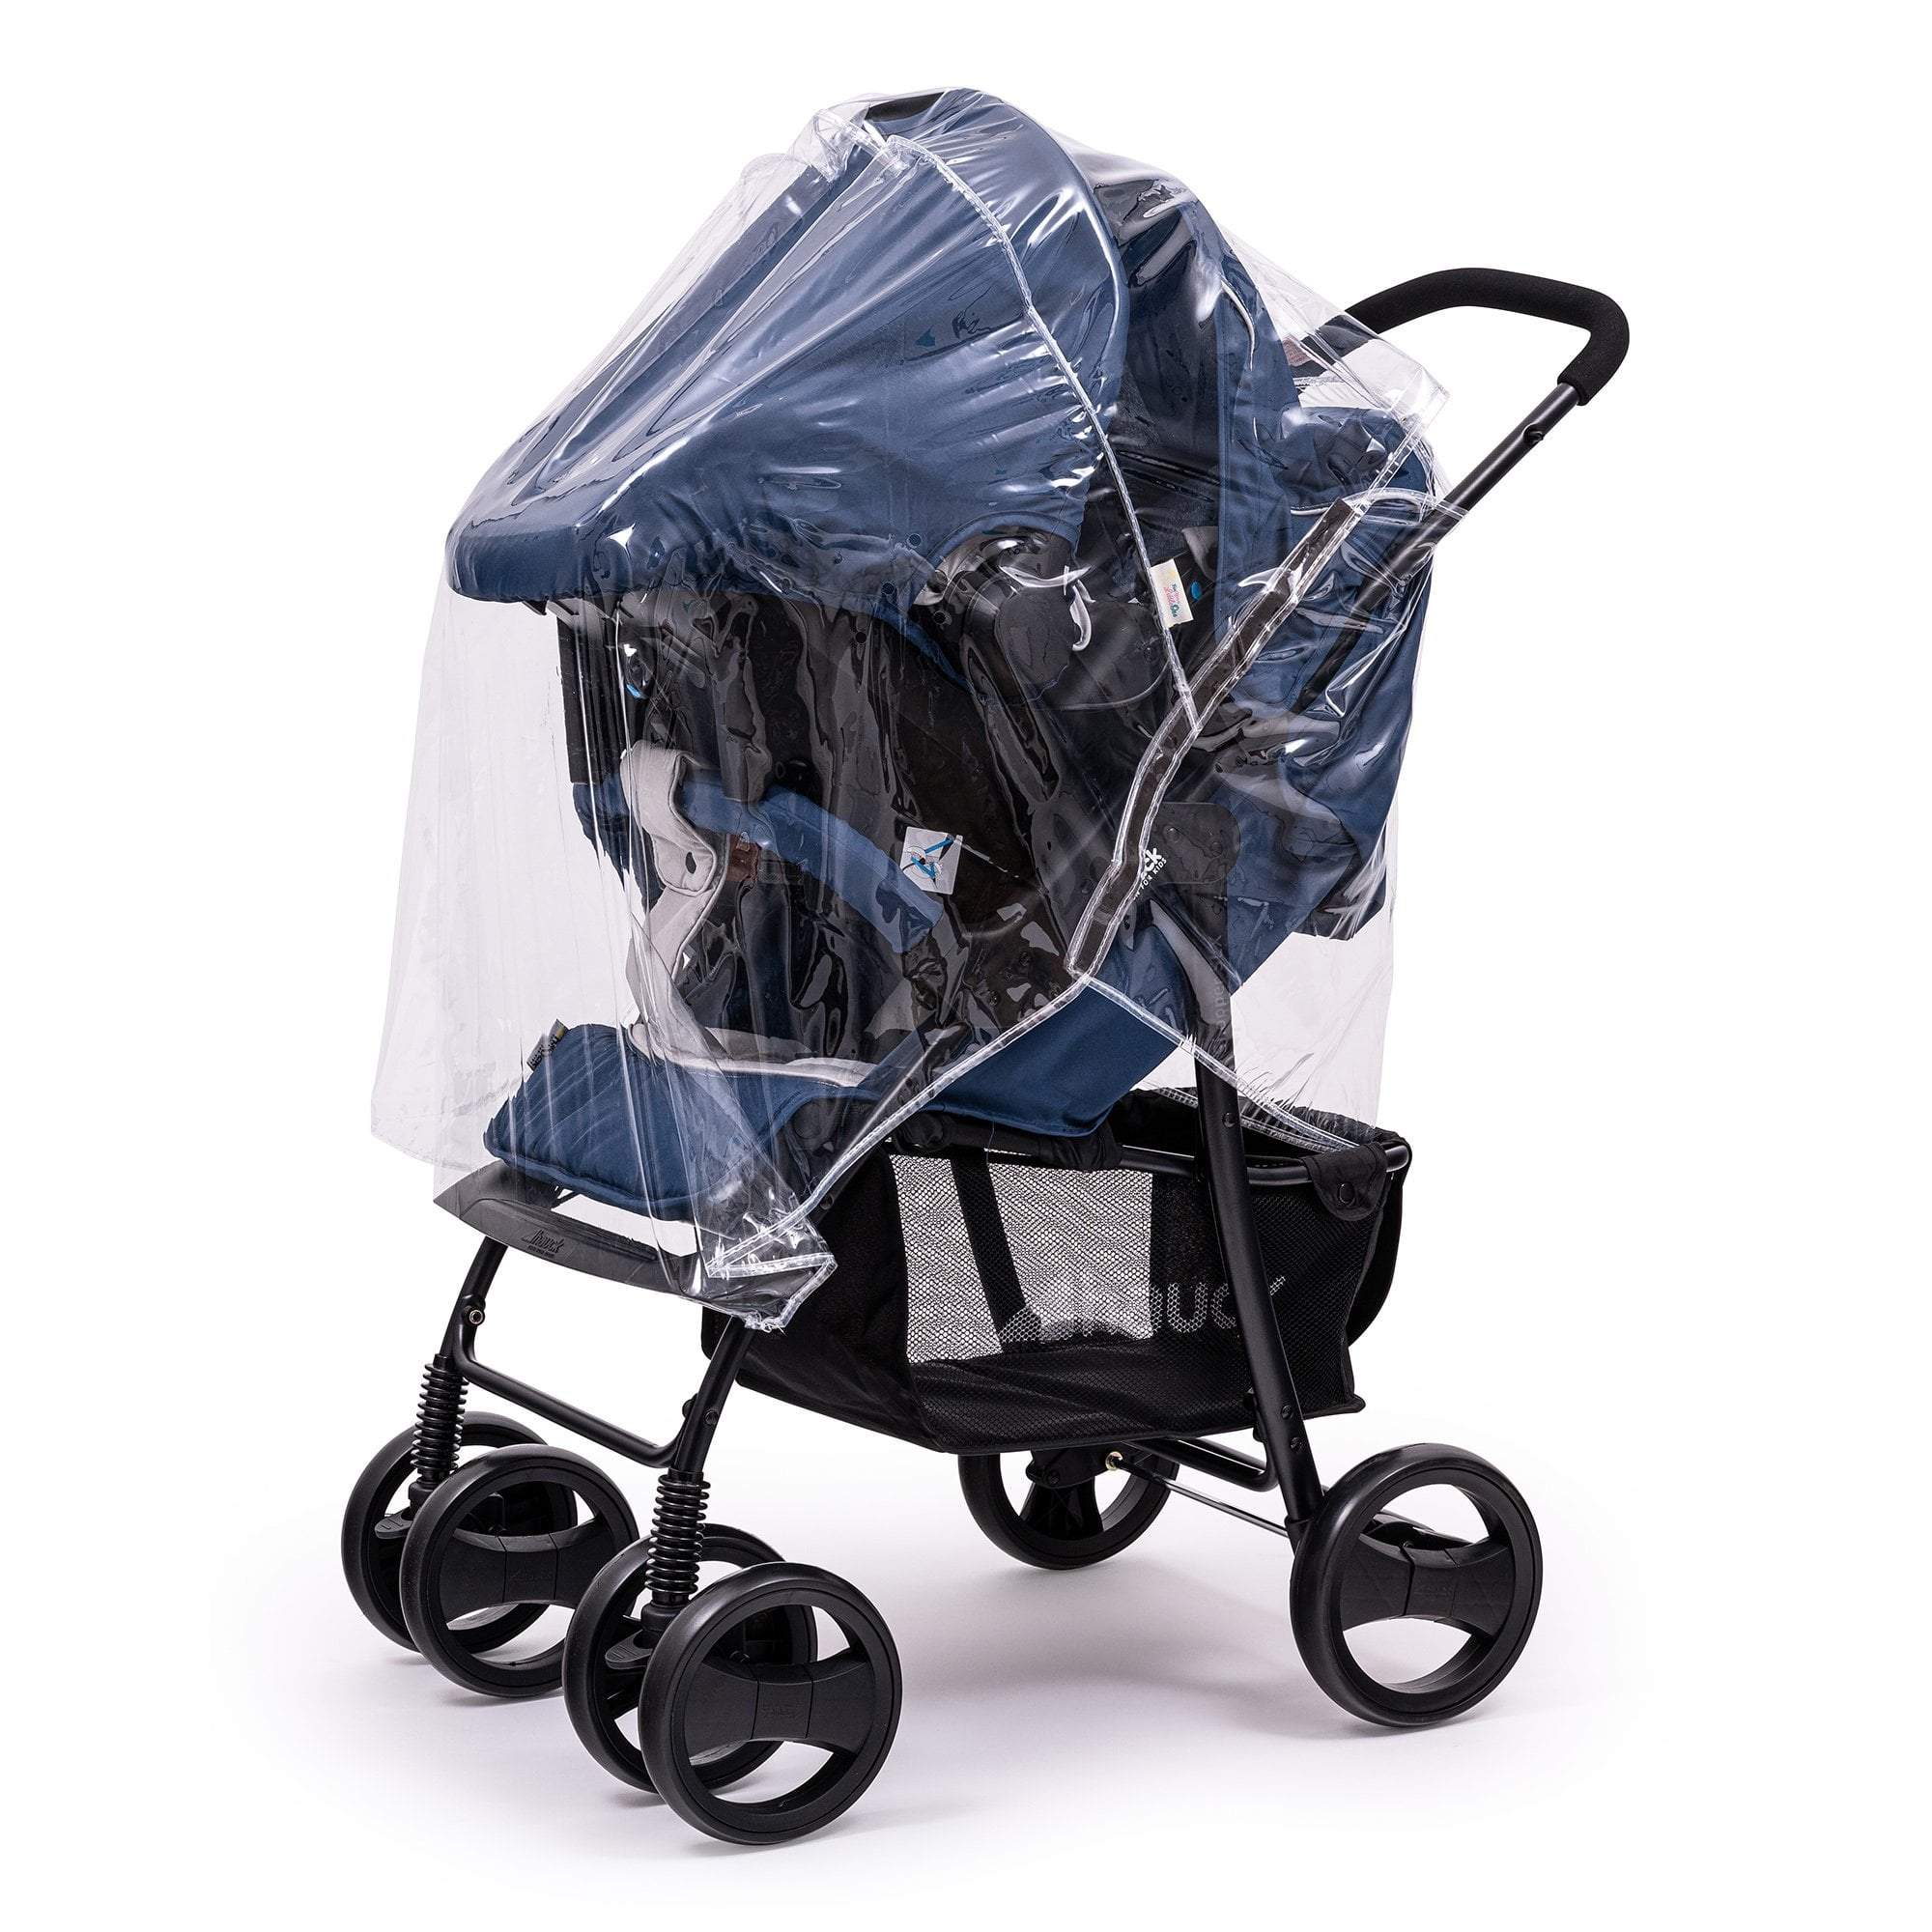 Travel System Raincover Compatible with BabyStyle - Fits All Models - For Your Little One